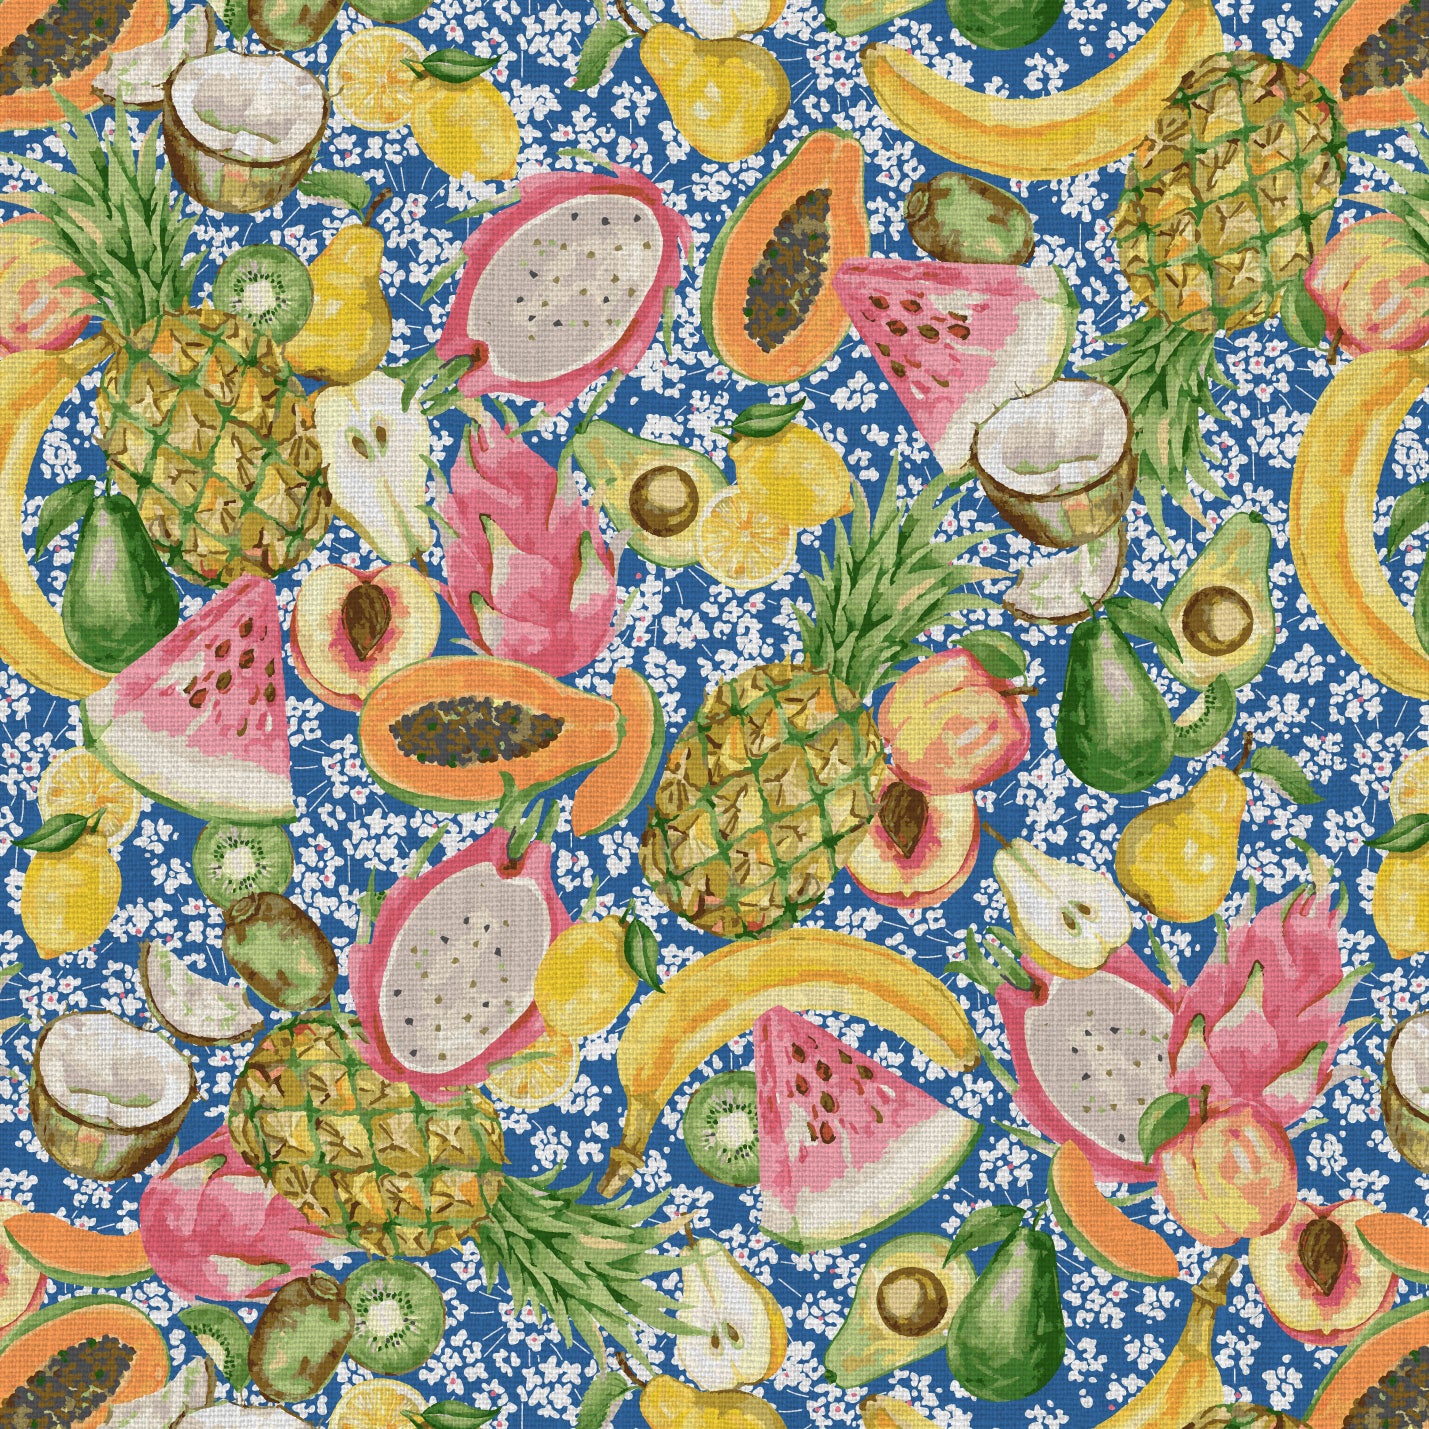 wallpaper hand painted with watercolors, blue based print with white ditsy florals with tossed fruit layered on top including: pineapples, limes, bananas, avocados, lemons, pears, peaches, watermelon, coconuts, mangos, bananas passion fruit Natural Textured Eco-Friendly Non-toxic High-quality Sustainable practices Sustainability Interior Design Wall covering Bold tropical retro chic garden linen